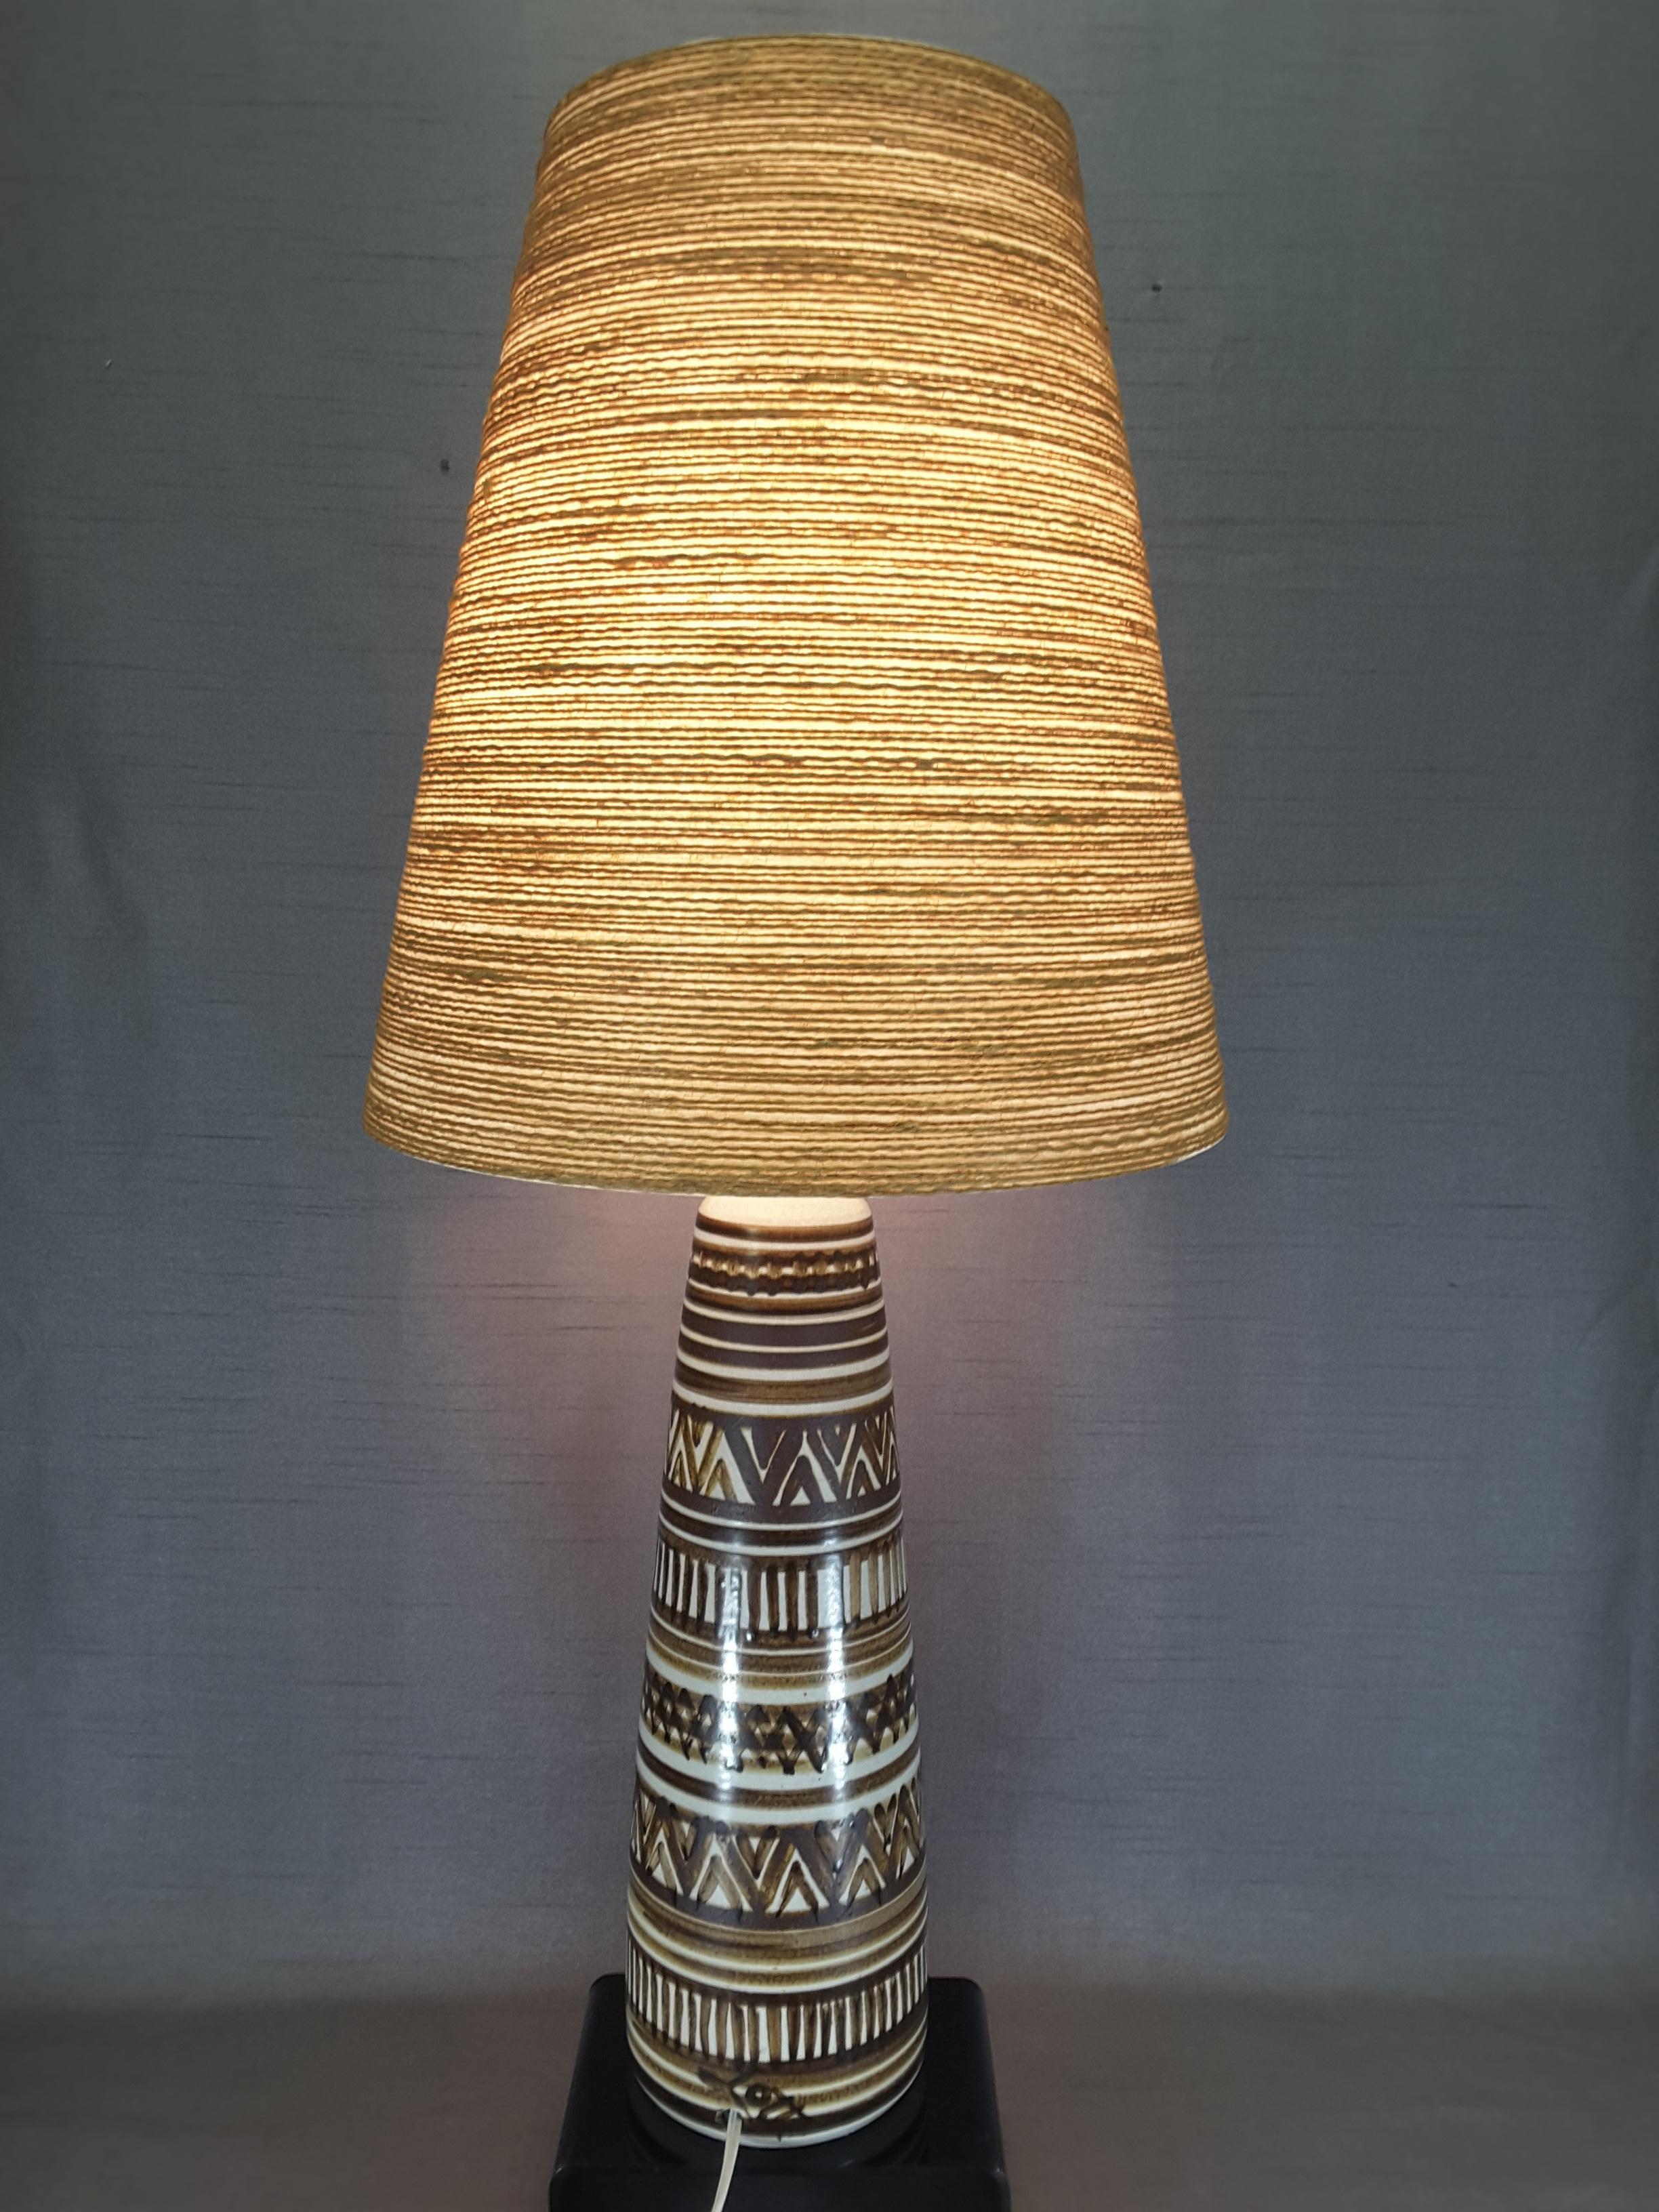 Large Signed Lotte & Gunnar Bostlund Table Lamp, Tribal Pattern, 1960s For Sale 5